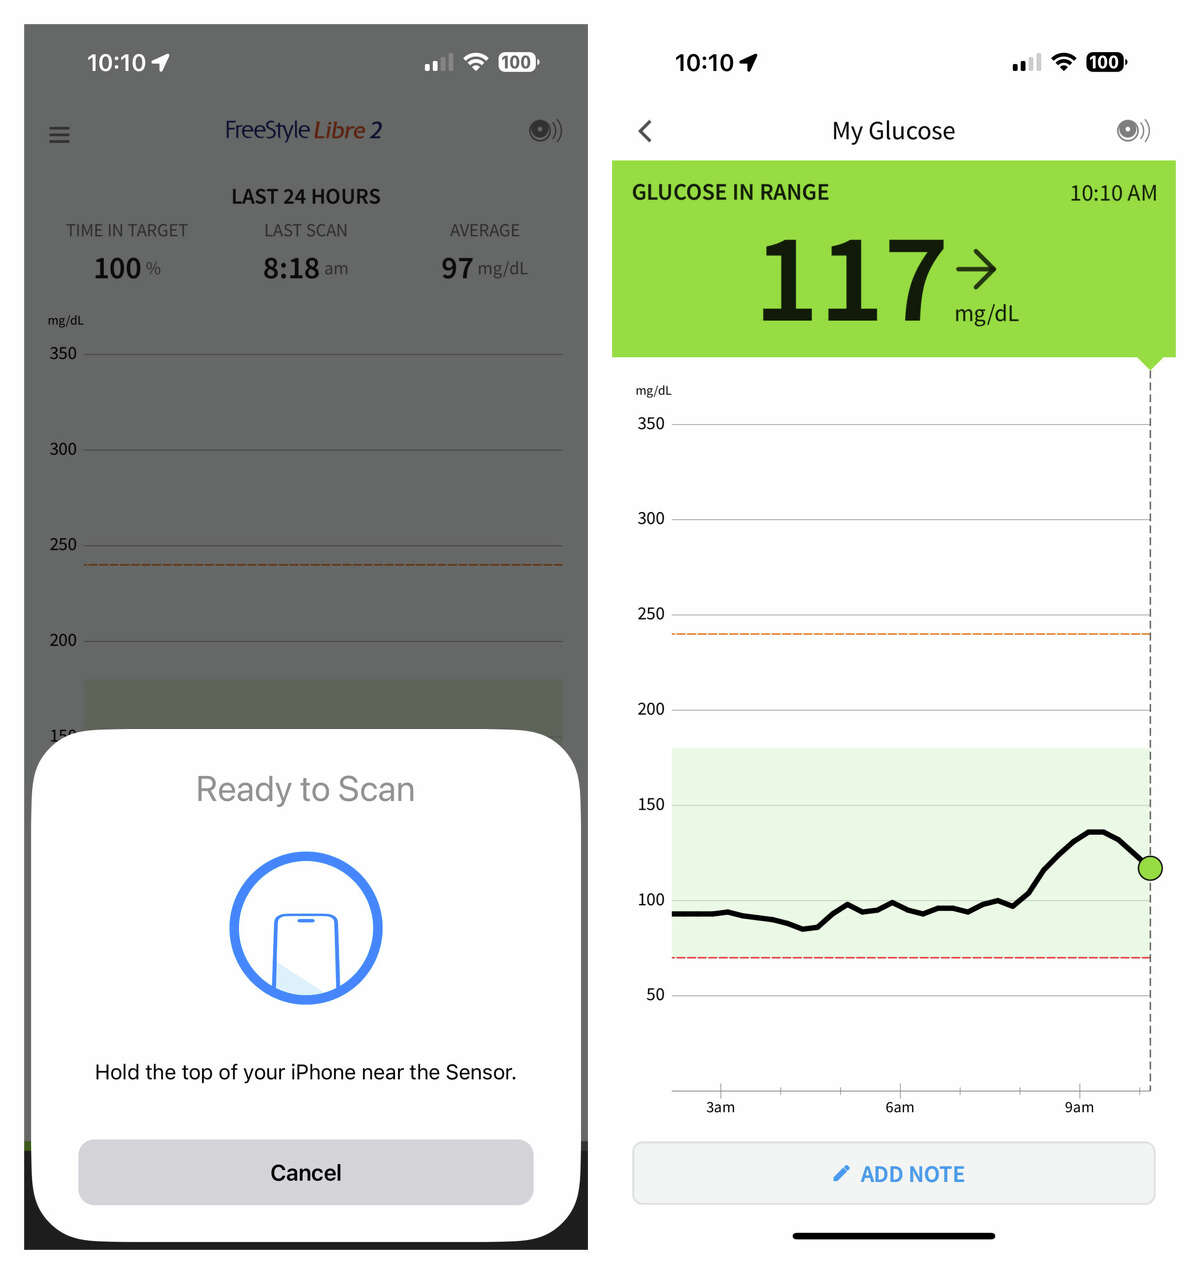 A smartphone app captures data from glucose measurements in the FreeStyle Libre 2 sensor. 